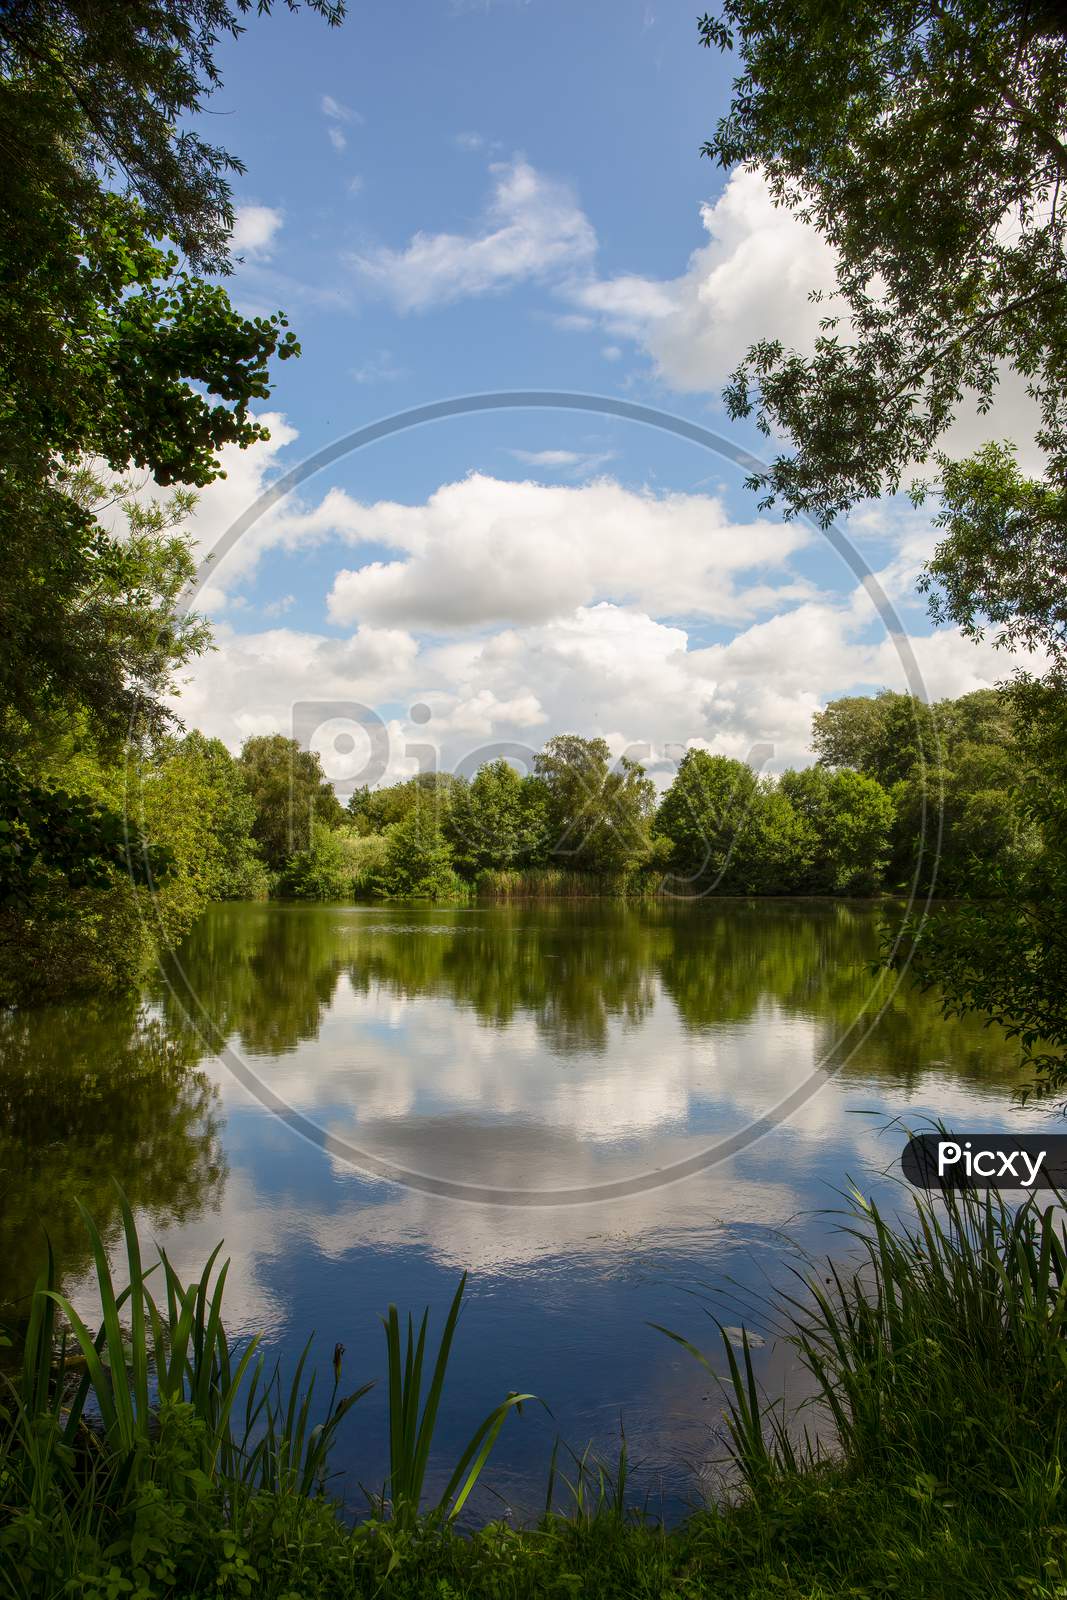 Lake Reflection Of Cloudy Blue Sky - Spring, Summers Season In England. Concept Of Peace In Nature